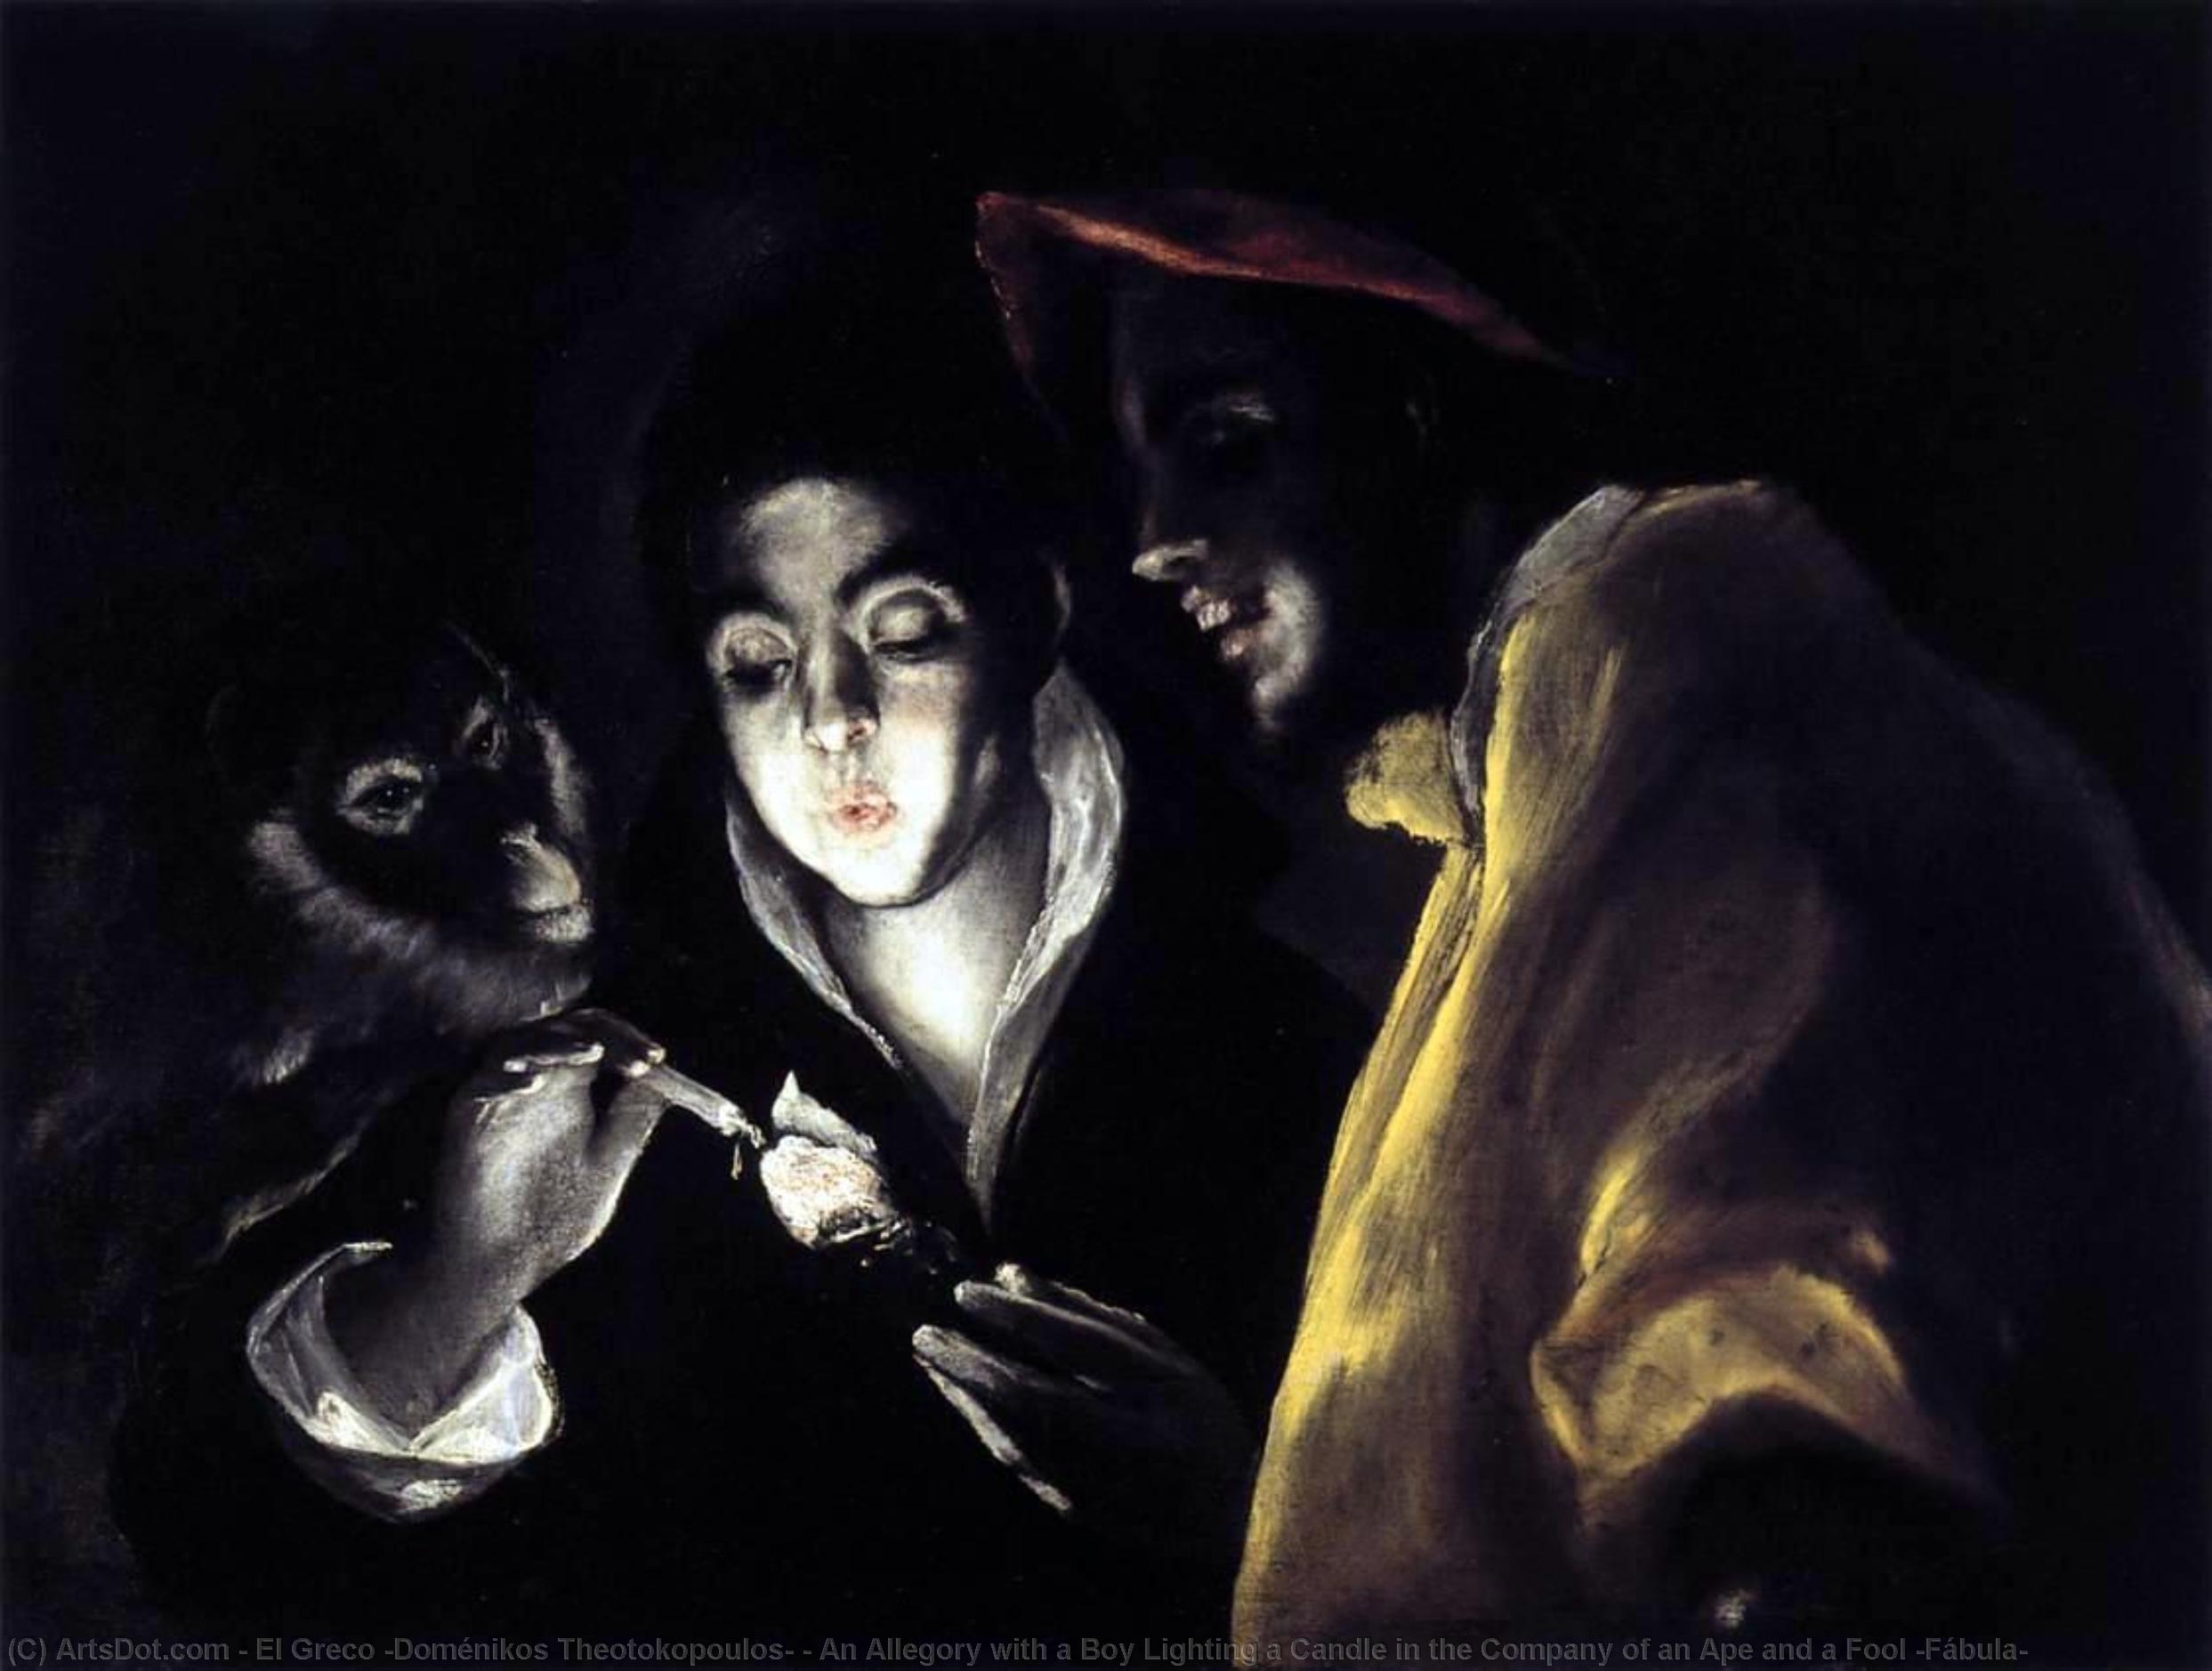 Order Art Reproductions An Allegory with a Boy Lighting a Candle in the Company of an Ape and a Fool (Fábula), 1589 by El Greco (Doménikos Theotokopoulos) (1541-1614, Greece) | ArtsDot.com